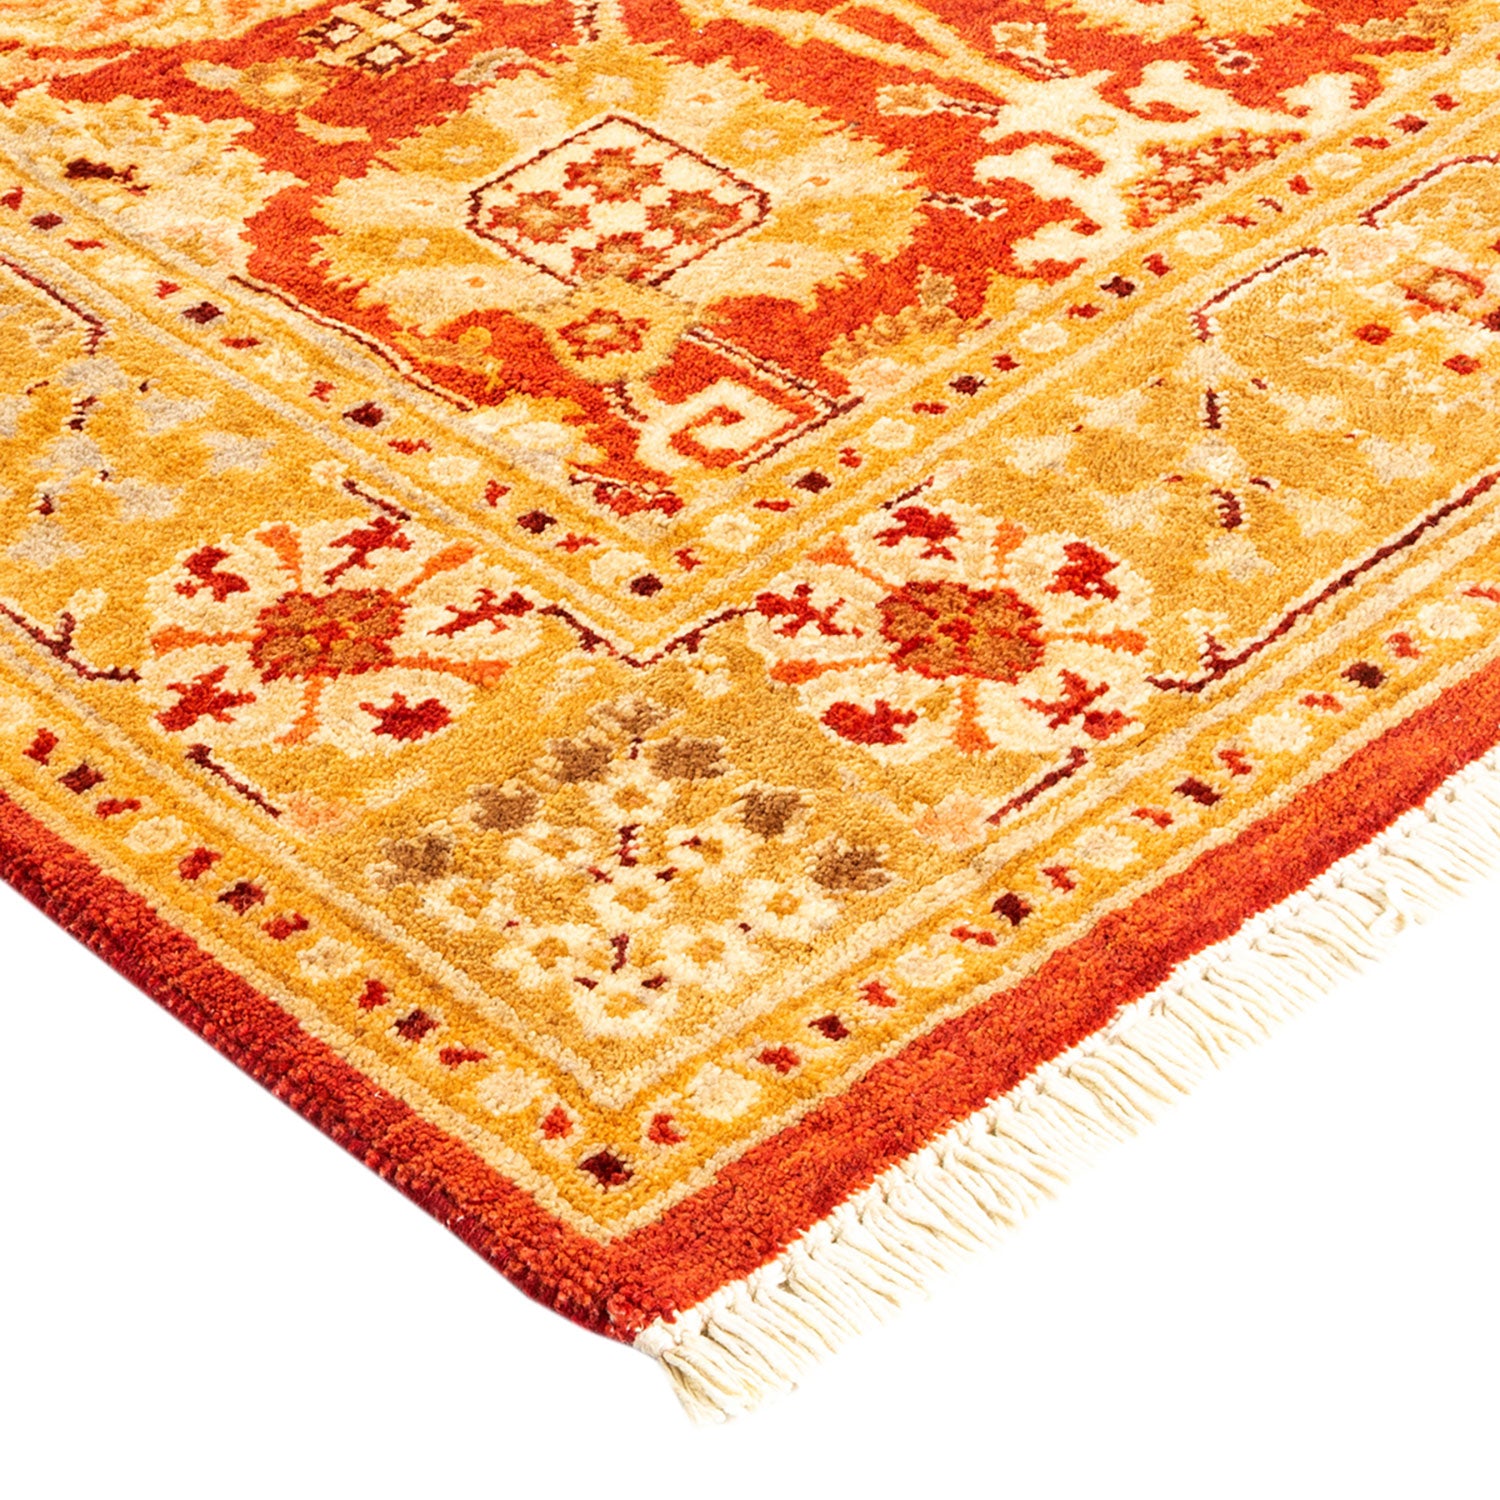 Traditional, ornate rug with intricate patterns and vibrant colors.